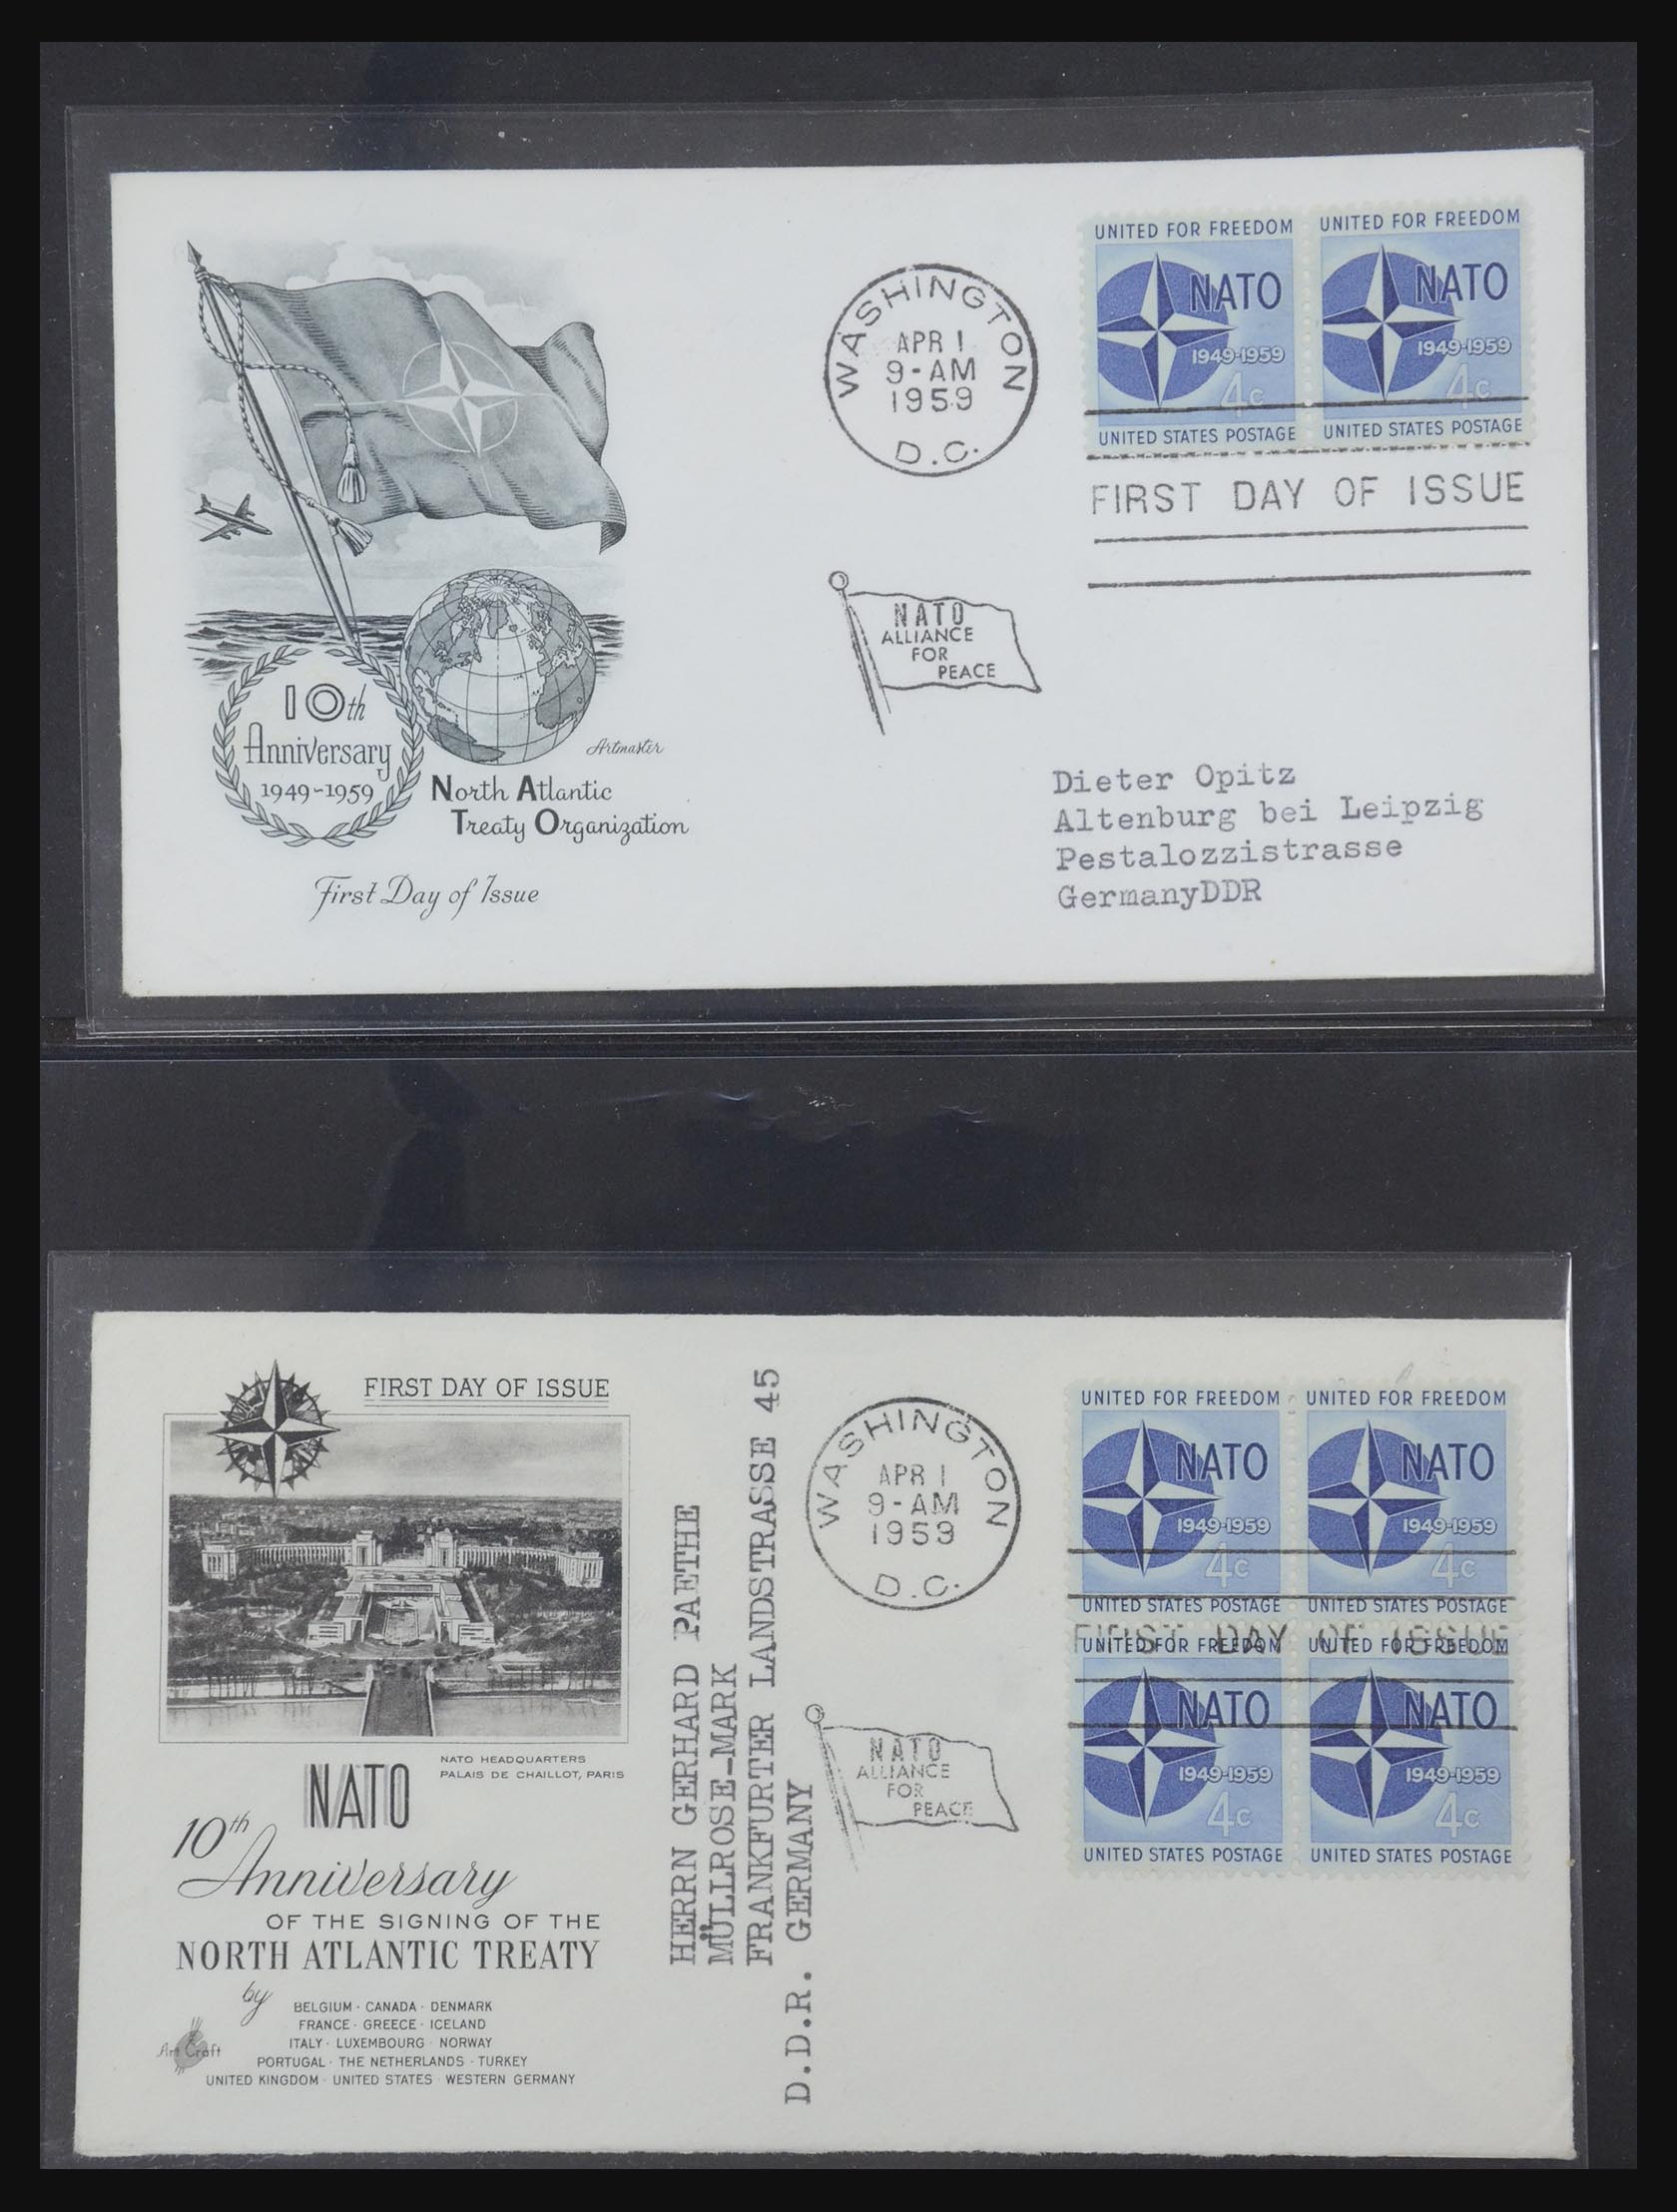 31913 0007 - 31913 USA fdc-collectie 1945-1990.